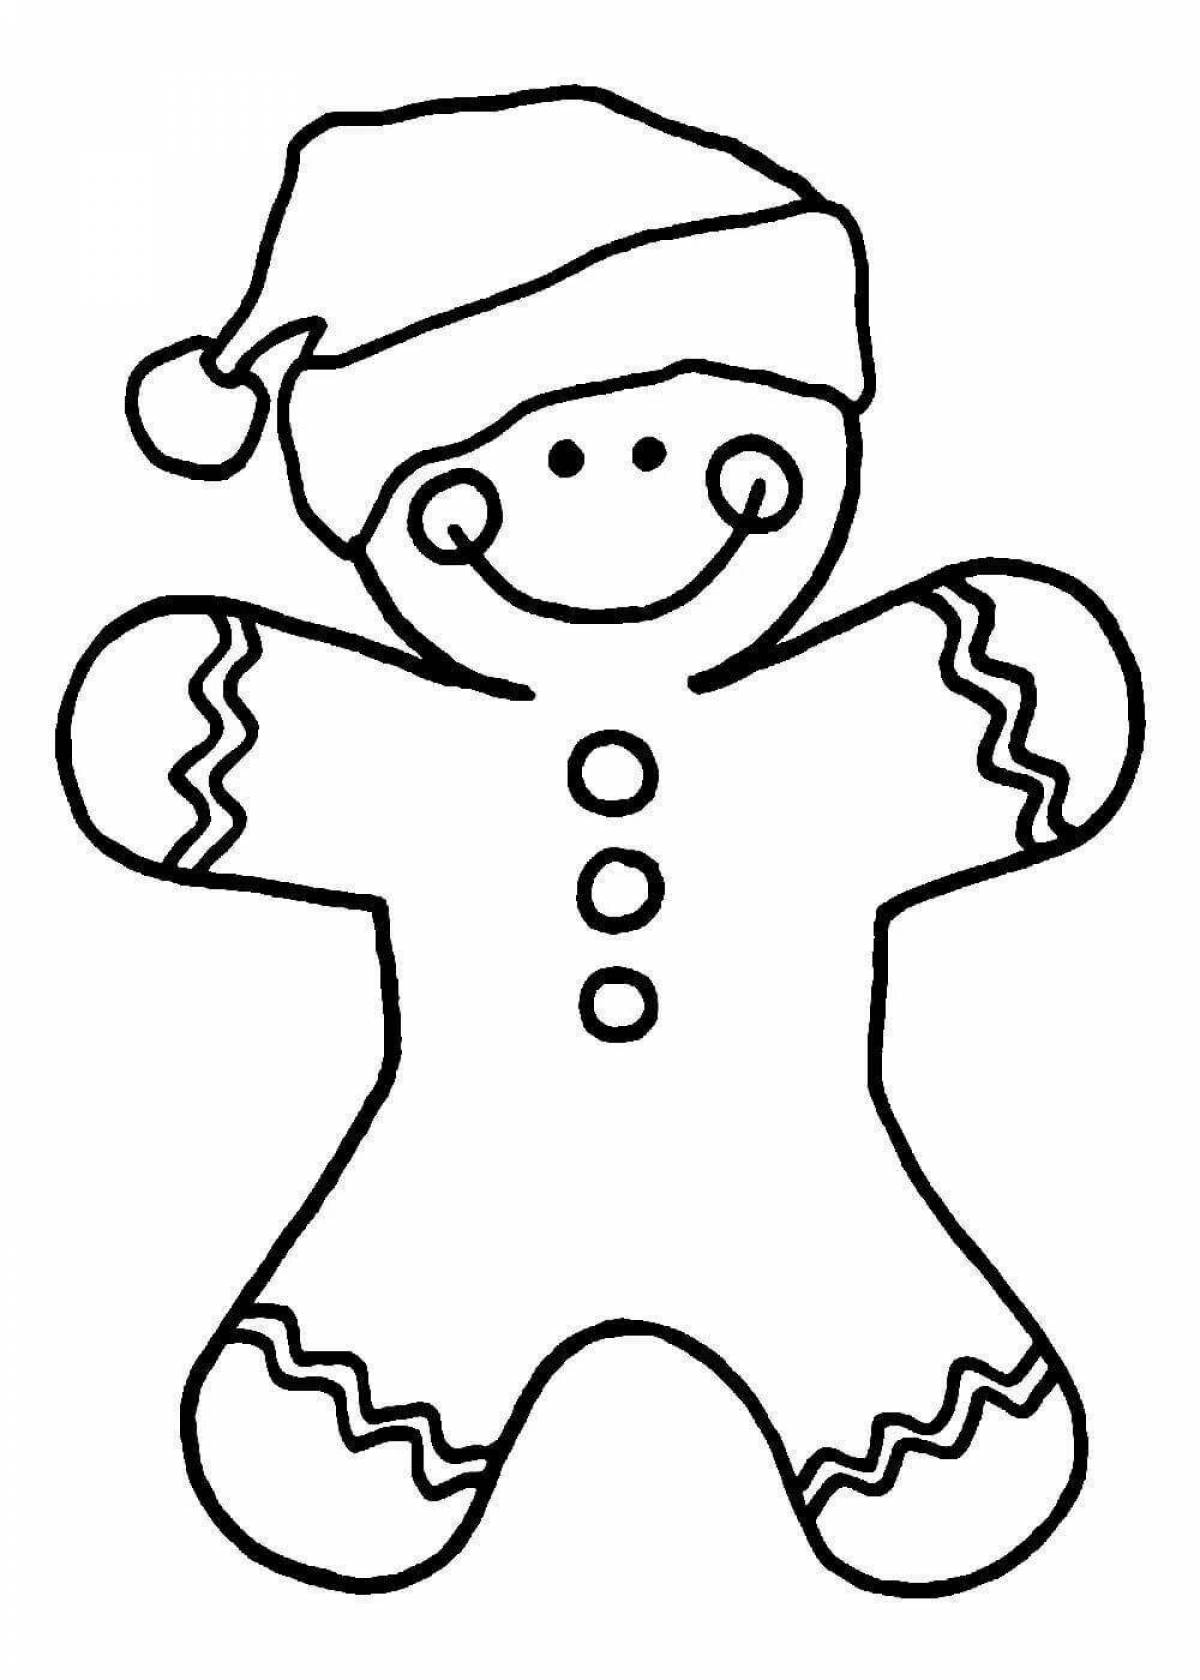 Great gingerbread Christmas coloring book